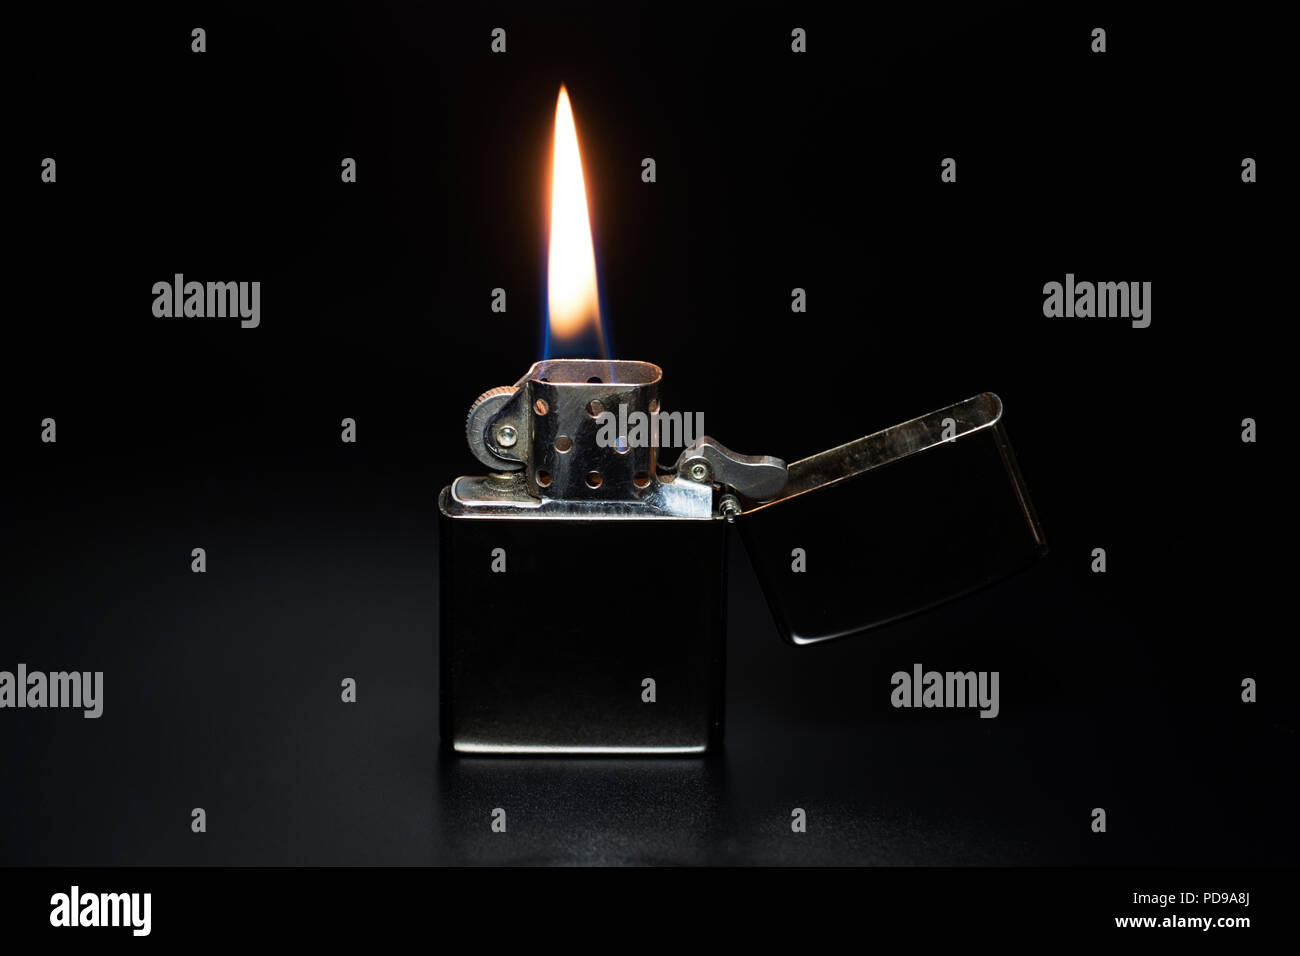 Shiny silver metallic lighter with lit flame of fire on a black background. Stock Photo